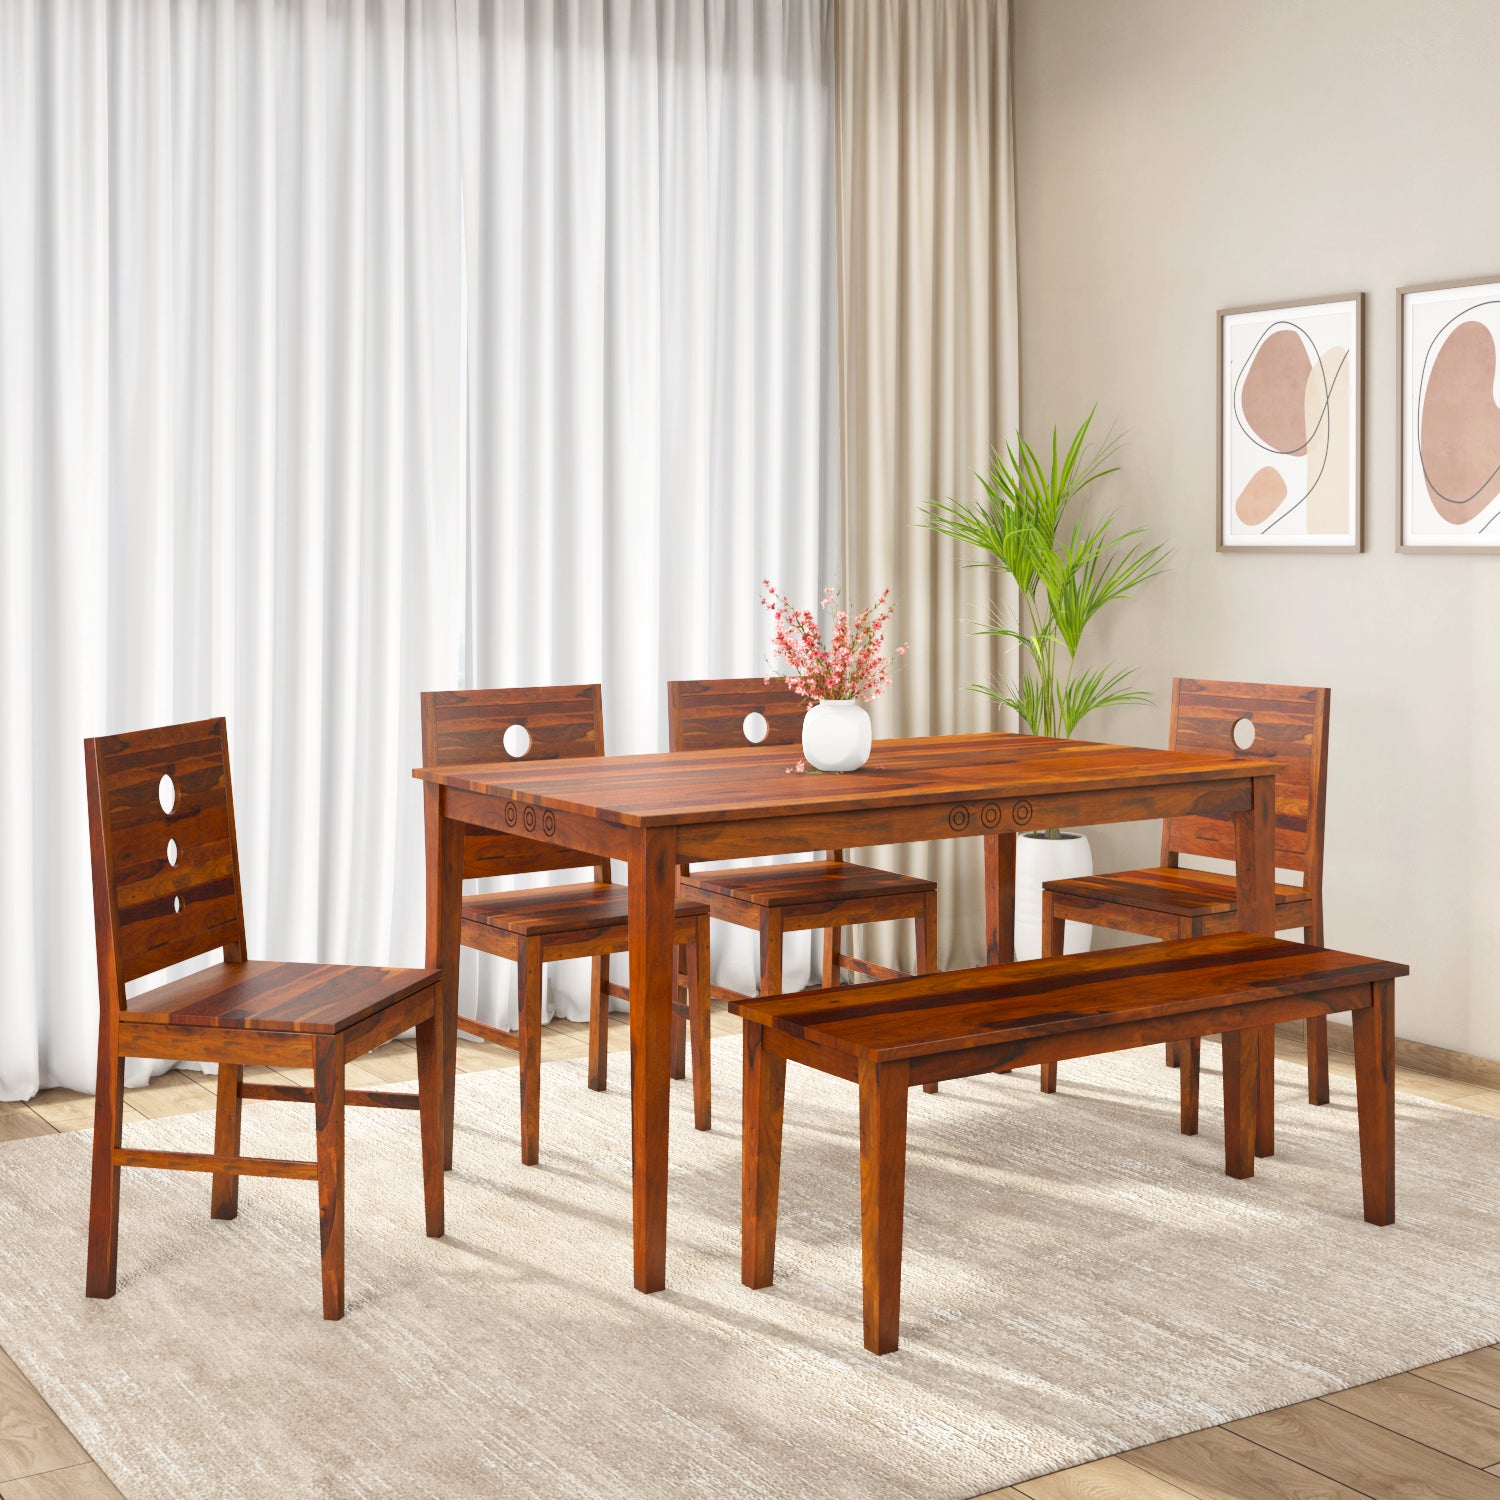 Target 6 Seater Dining Set With Bench (Walnut)